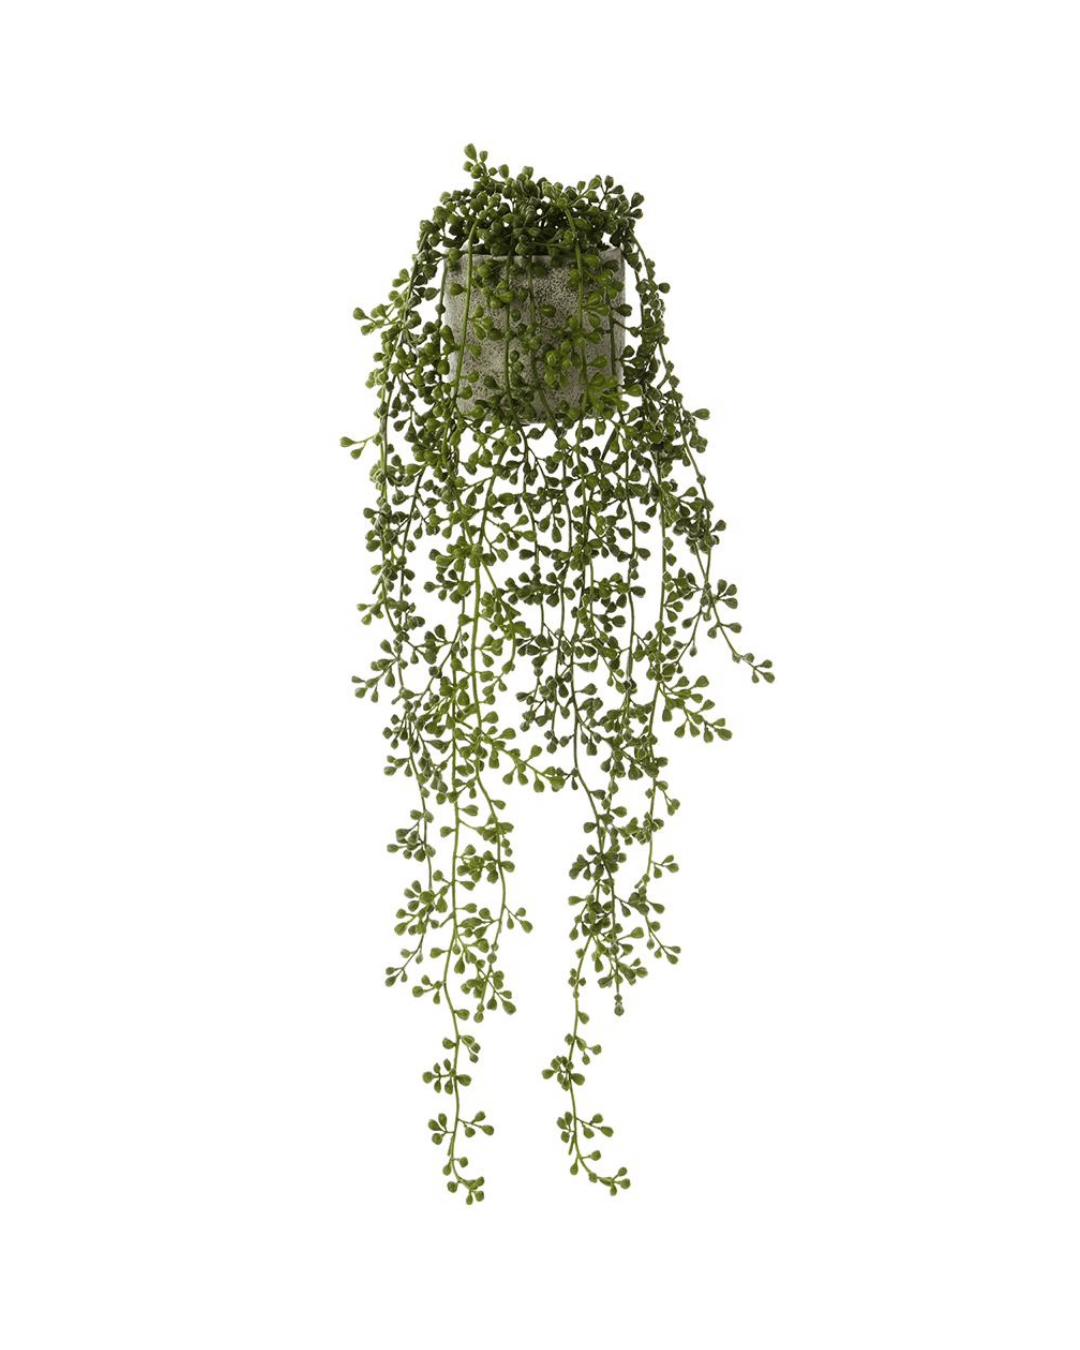 A 25&quot; Hanging String of Pearl in Cement Pot, with lush, cascading green tendrils flowing downward from a square, top-mounted pot, isolated on a white background in Scottsdale, Arizona by AllState Floral And Craft.